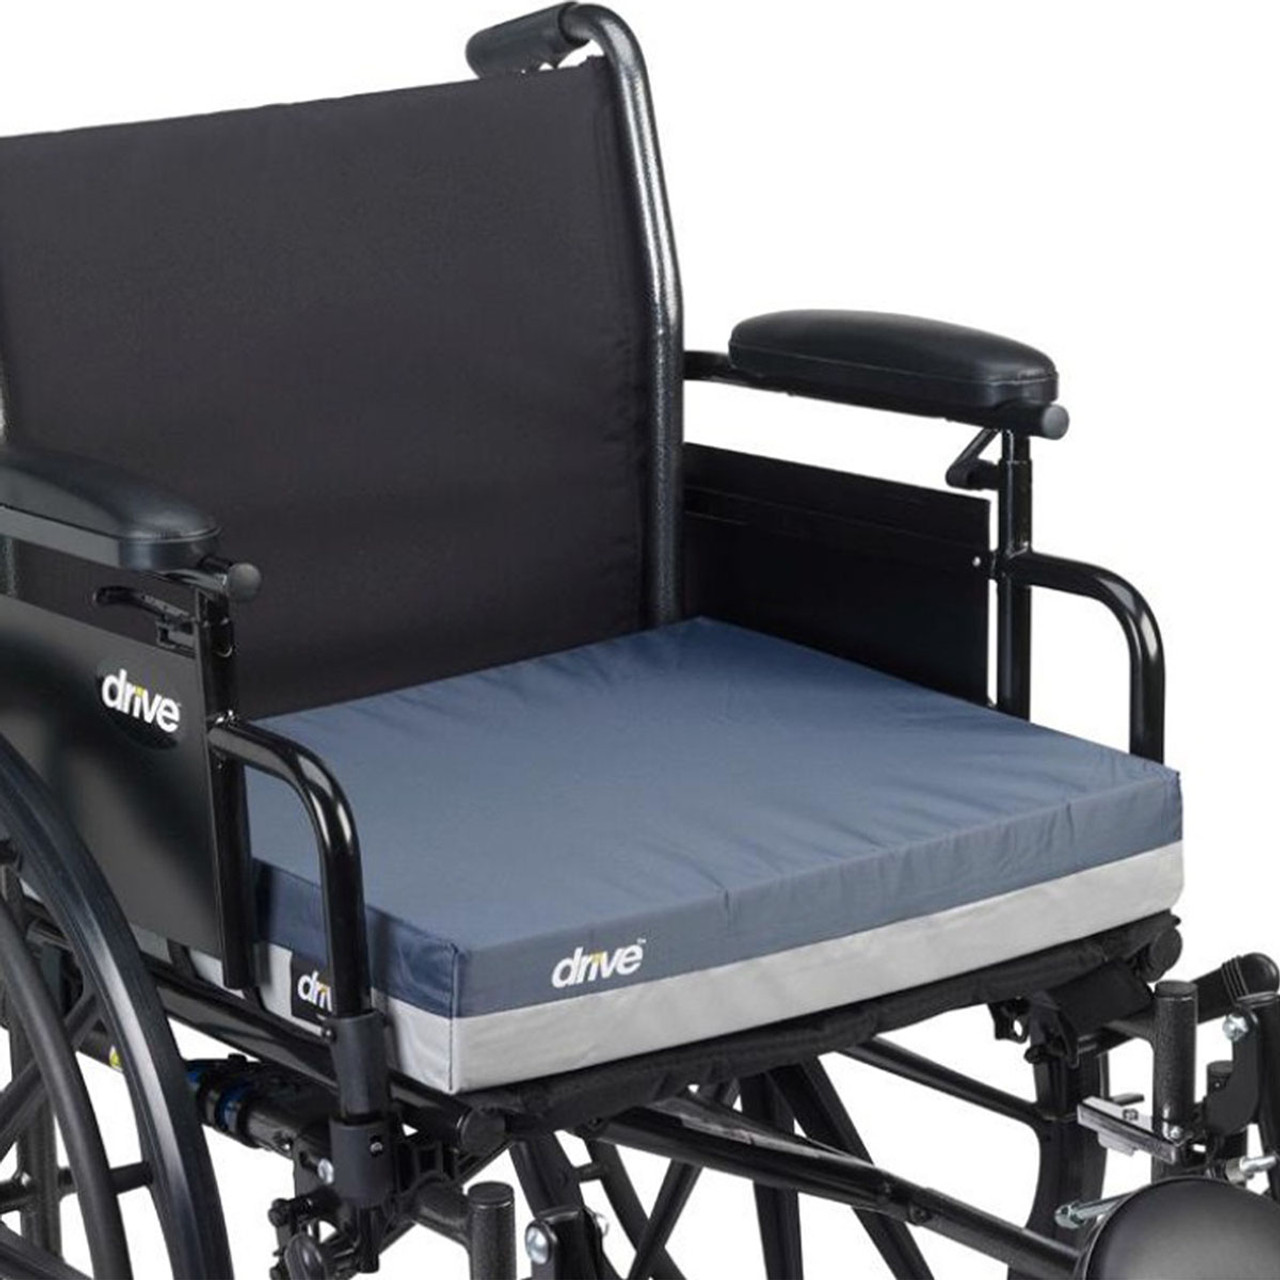 https://cdn11.bigcommerce.com/s-13ttxa/images/stencil/1280x1280/products/22433/25837/Wheelchair_Cushion_w_Removable_Cover_FoamGel_16_x_16_x_3_on_chair__10155.1689286277.jpg?c=2